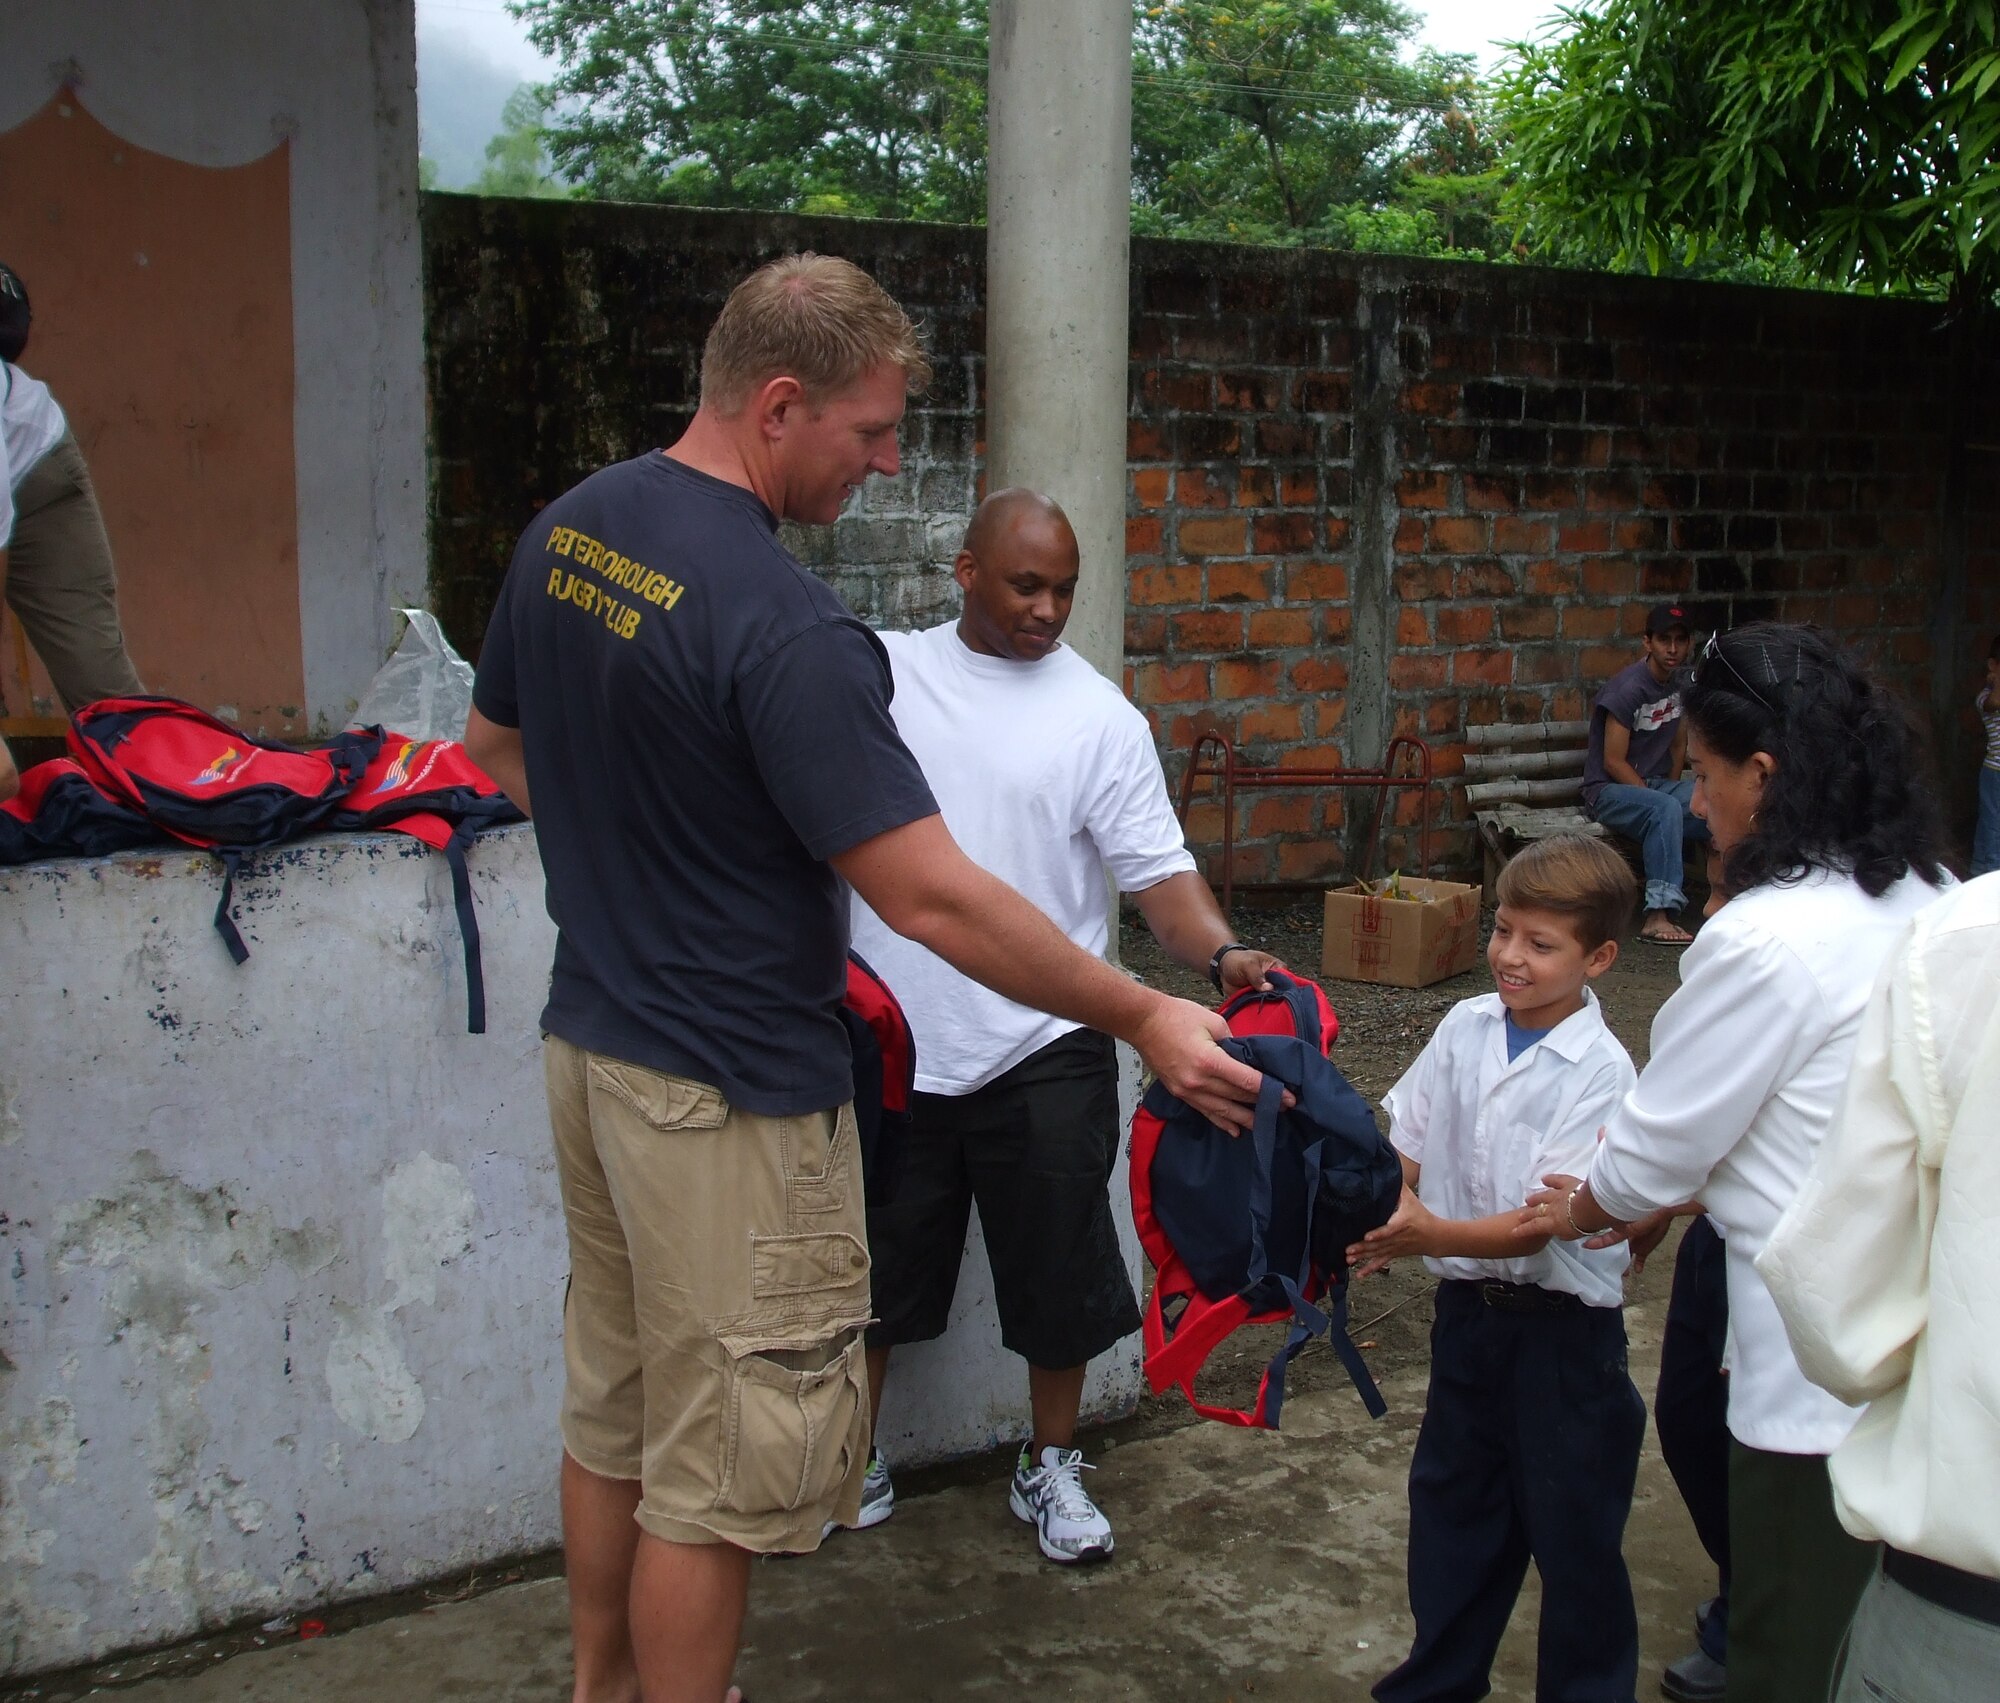 Technical Sergeants Alf Thompson (left) and Travis Dunson, both Quality Assurance Evaluators at FOL Manta, hand out backpacks to children at the school Escuela  Cuenca near the town of Portoviejo, Ecuador on Wednesday, May 7.  Last week members of FOL Manta helped give away 6,500 backpacks to underprivileged children.  (U.S. Air Force photo/Chaplain (Capt.) Steven Survance)